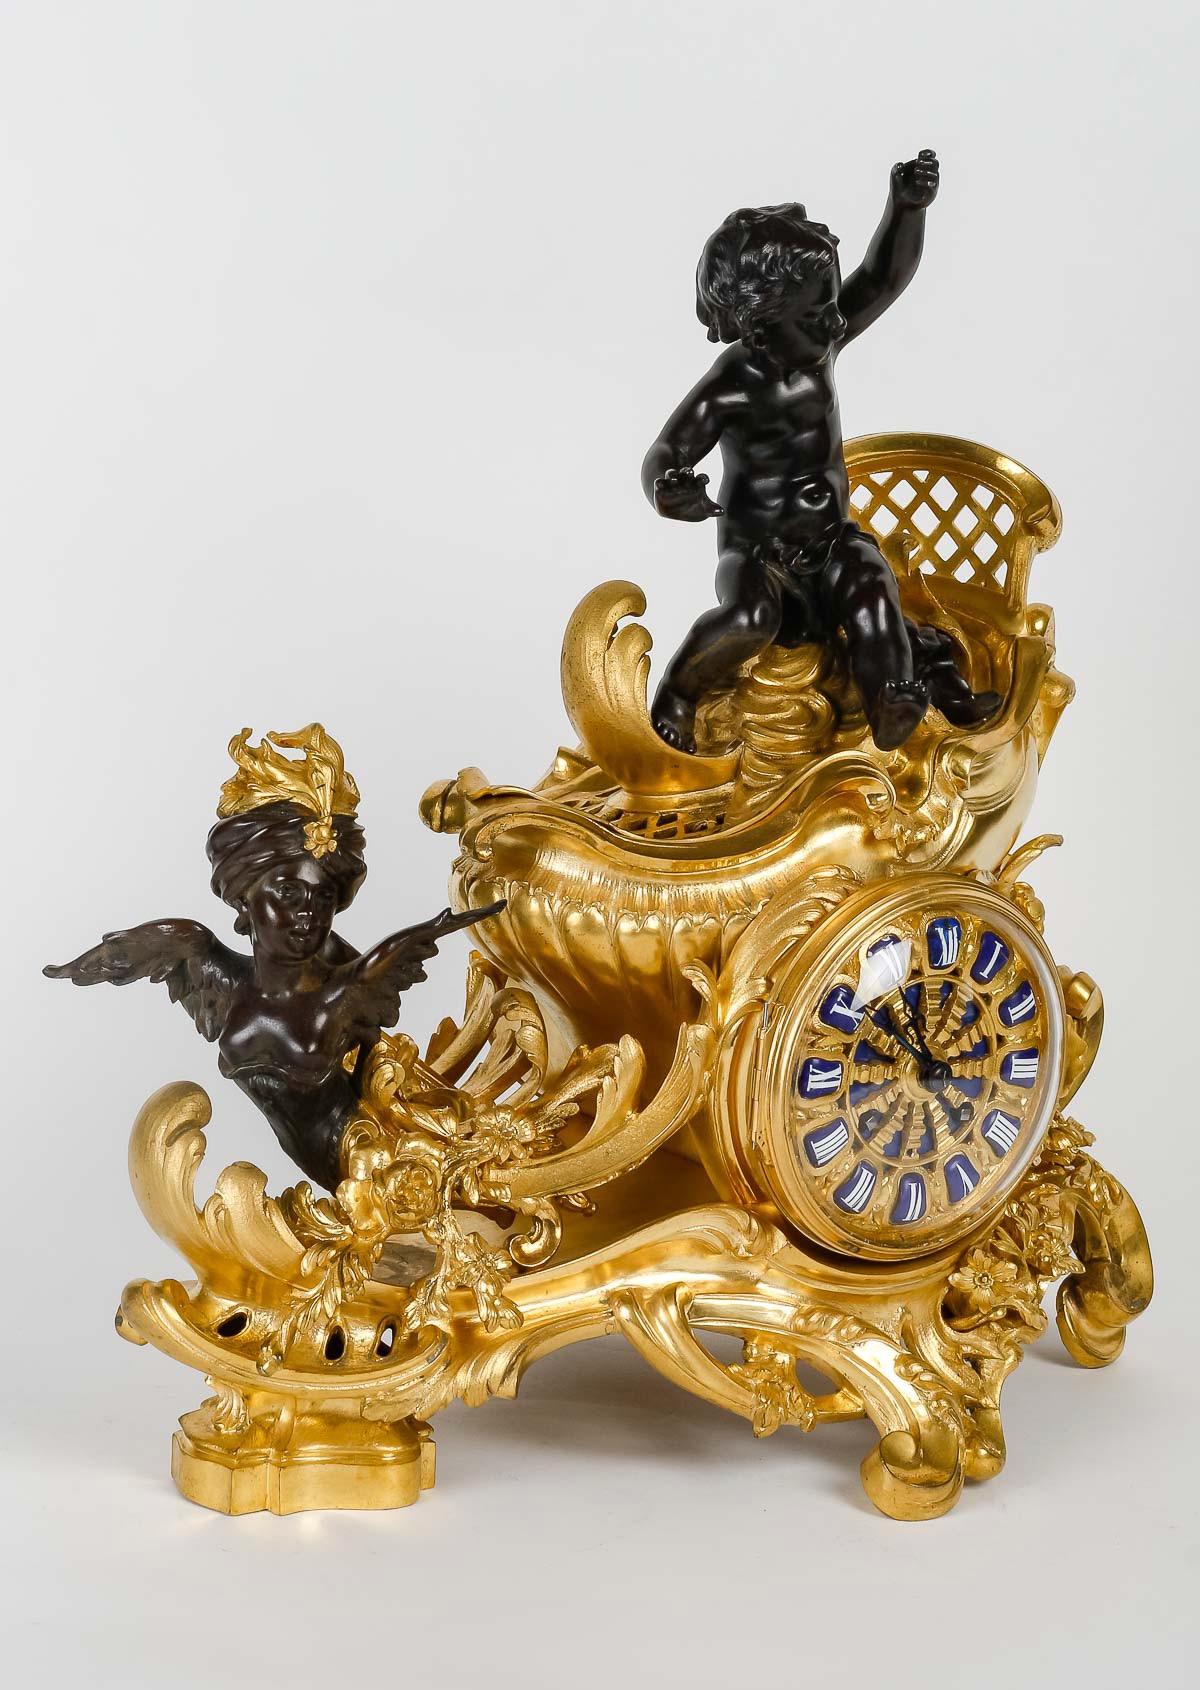 A French Ormolu and Patinated-Bronze ‘Chariot’ Three-pieces Clock Garniture
Attributed to François Linke (1855 - 1946), Paris, Late 19th/ Century 

The clock representing a putto on a chariot pulled by a winged female bust with turban, on